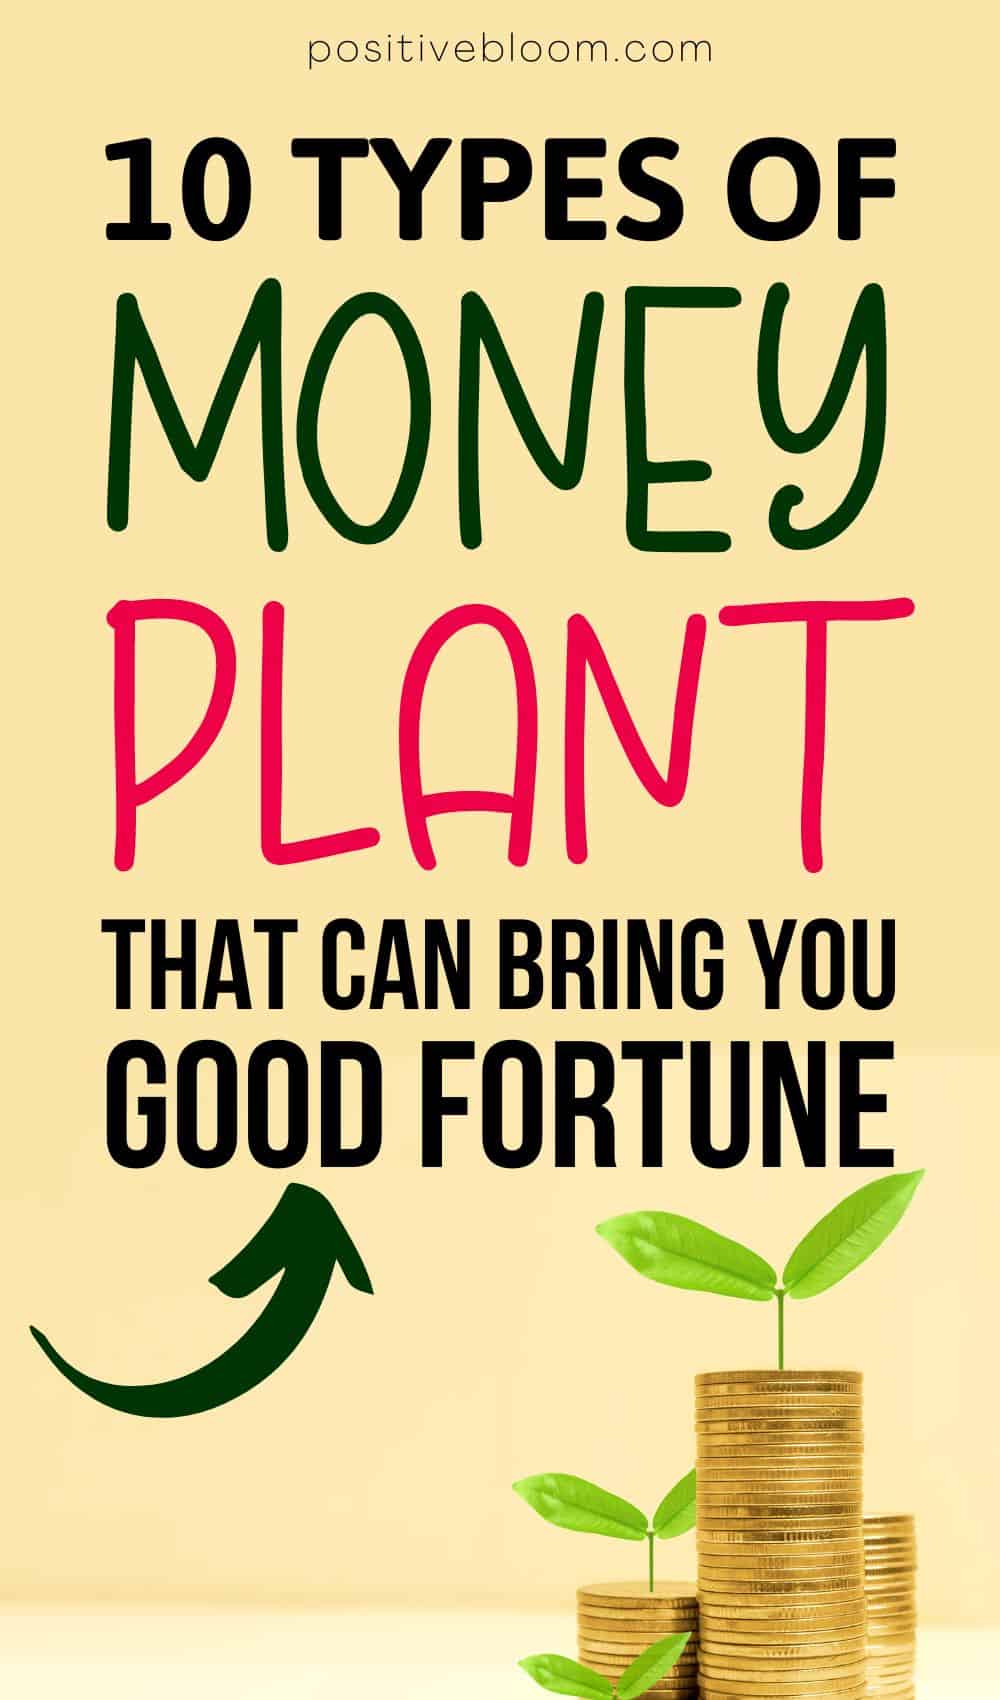 10 Types of Money Plant That Can Bring You Good Fortune